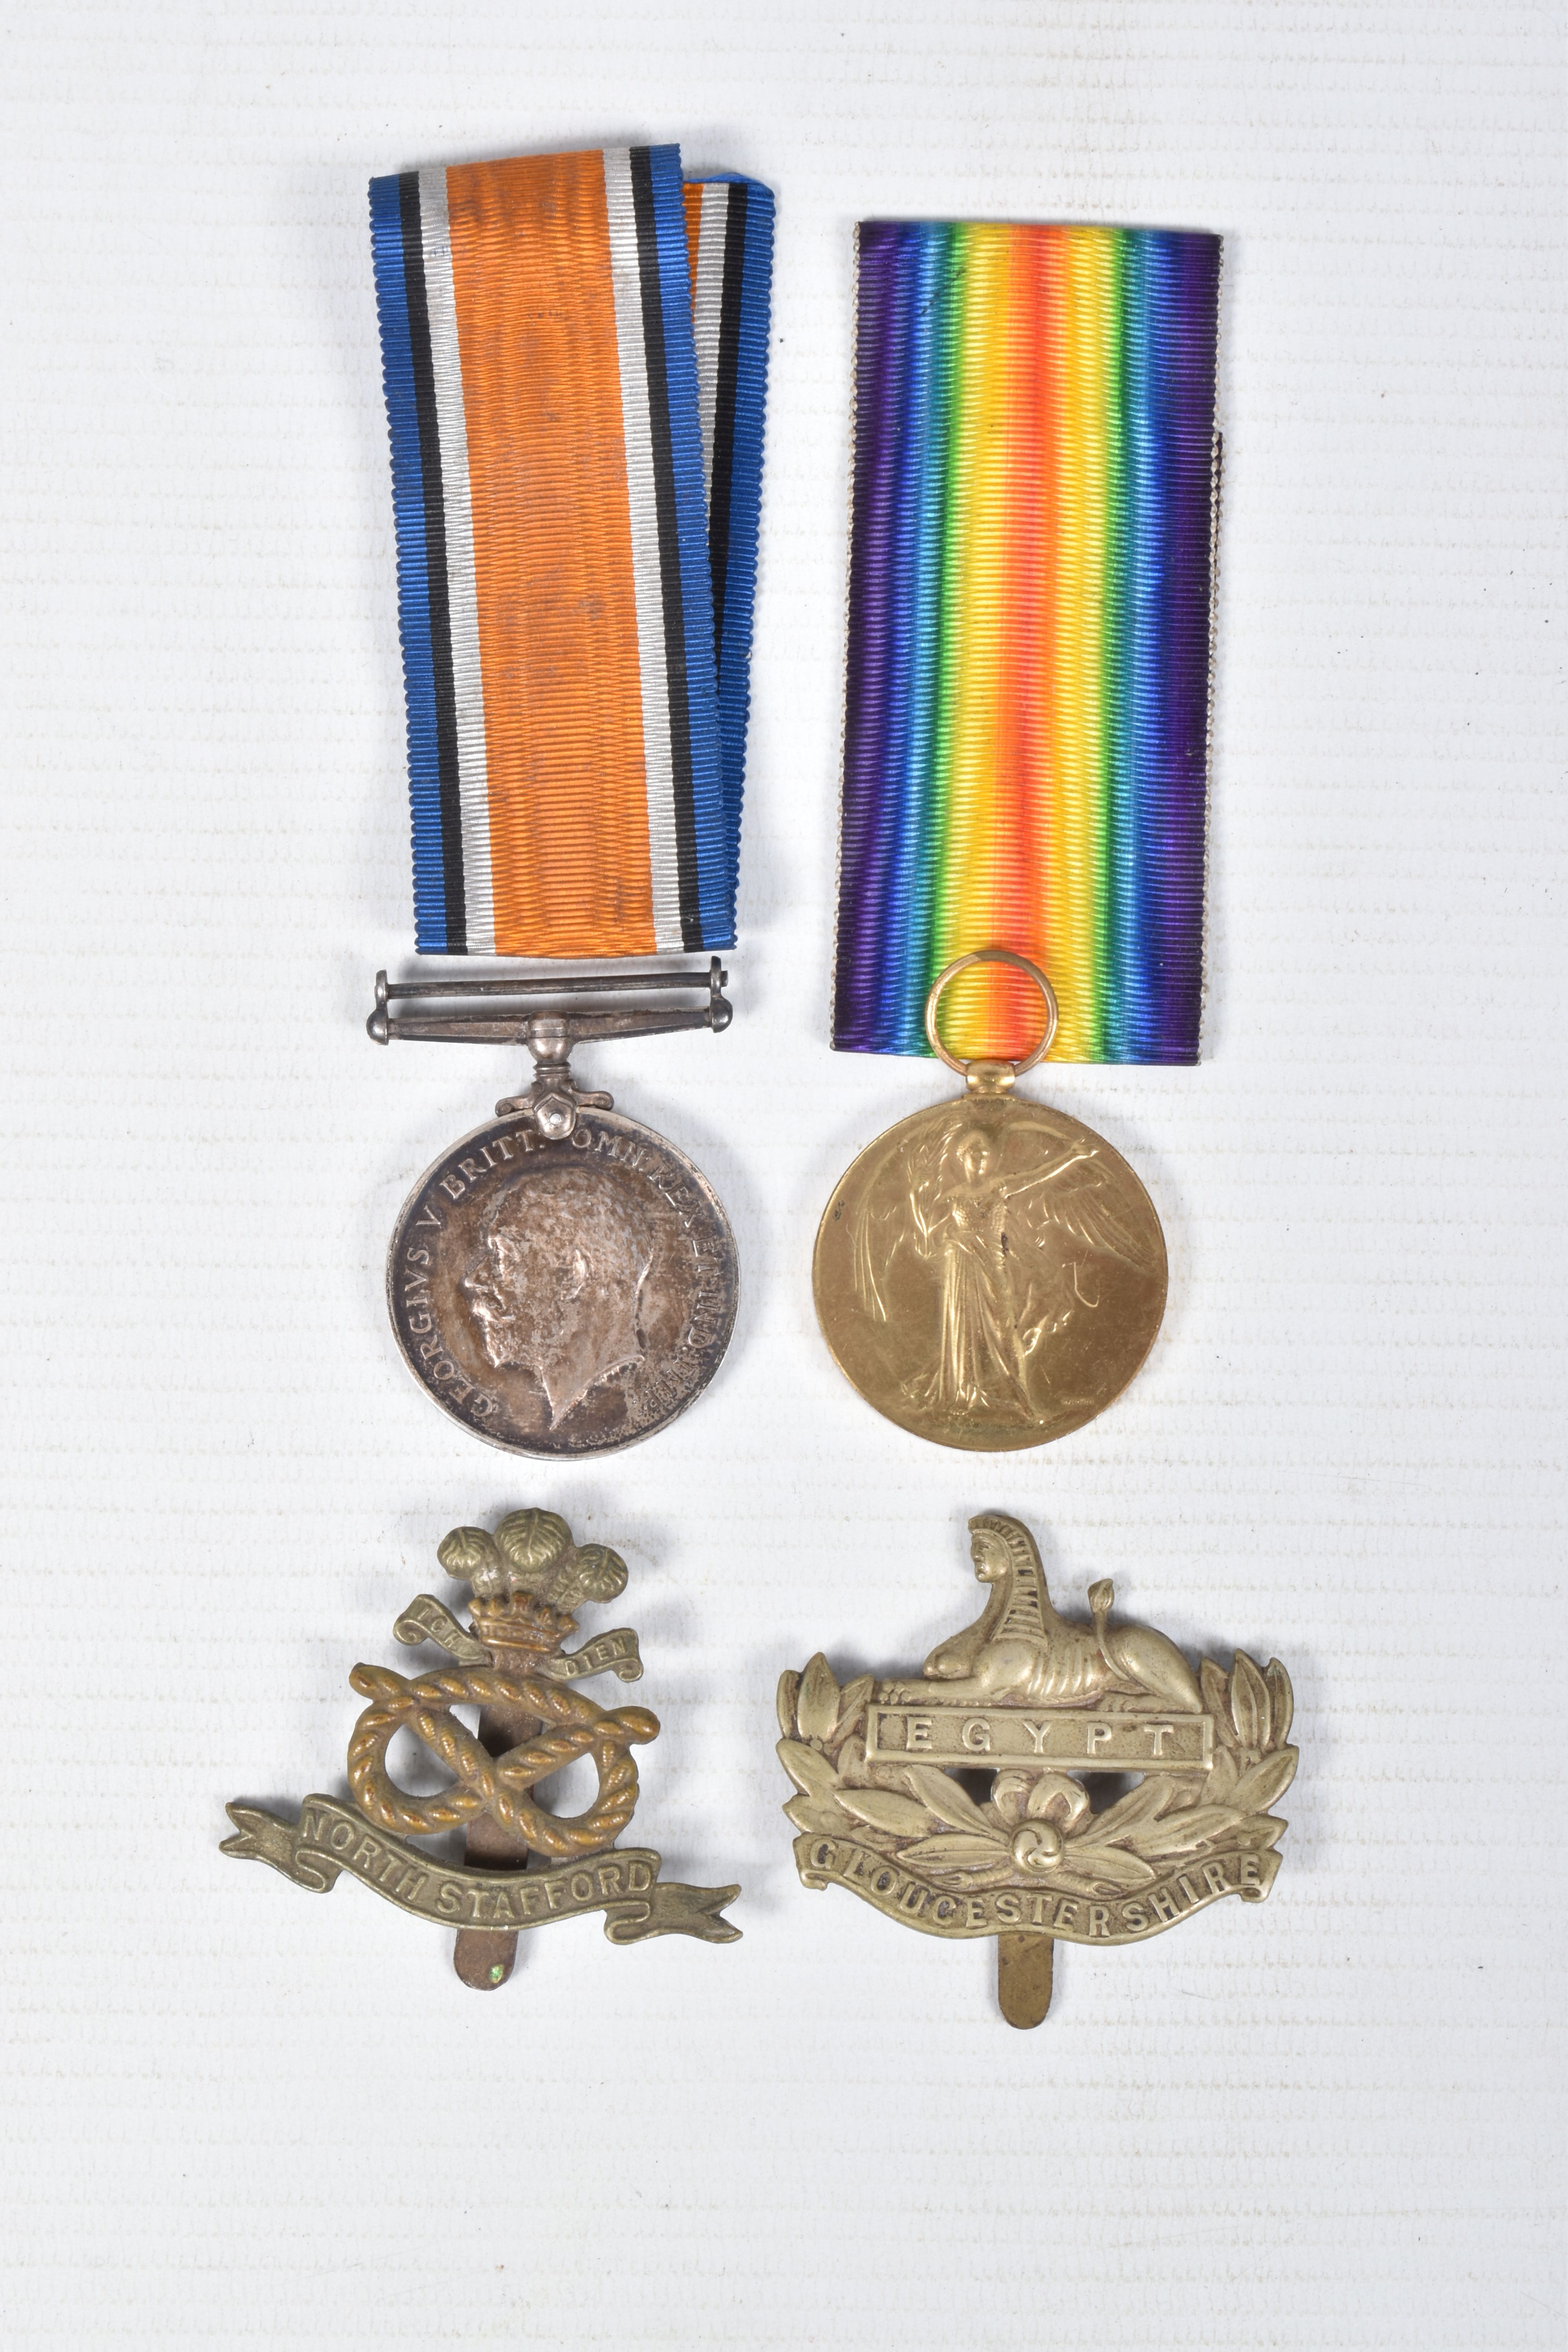 A WWI PAIR OF DURHAM LIGHT INFANTRY MEDALS AND TWO CAP BADGES, the medals are both correctly named